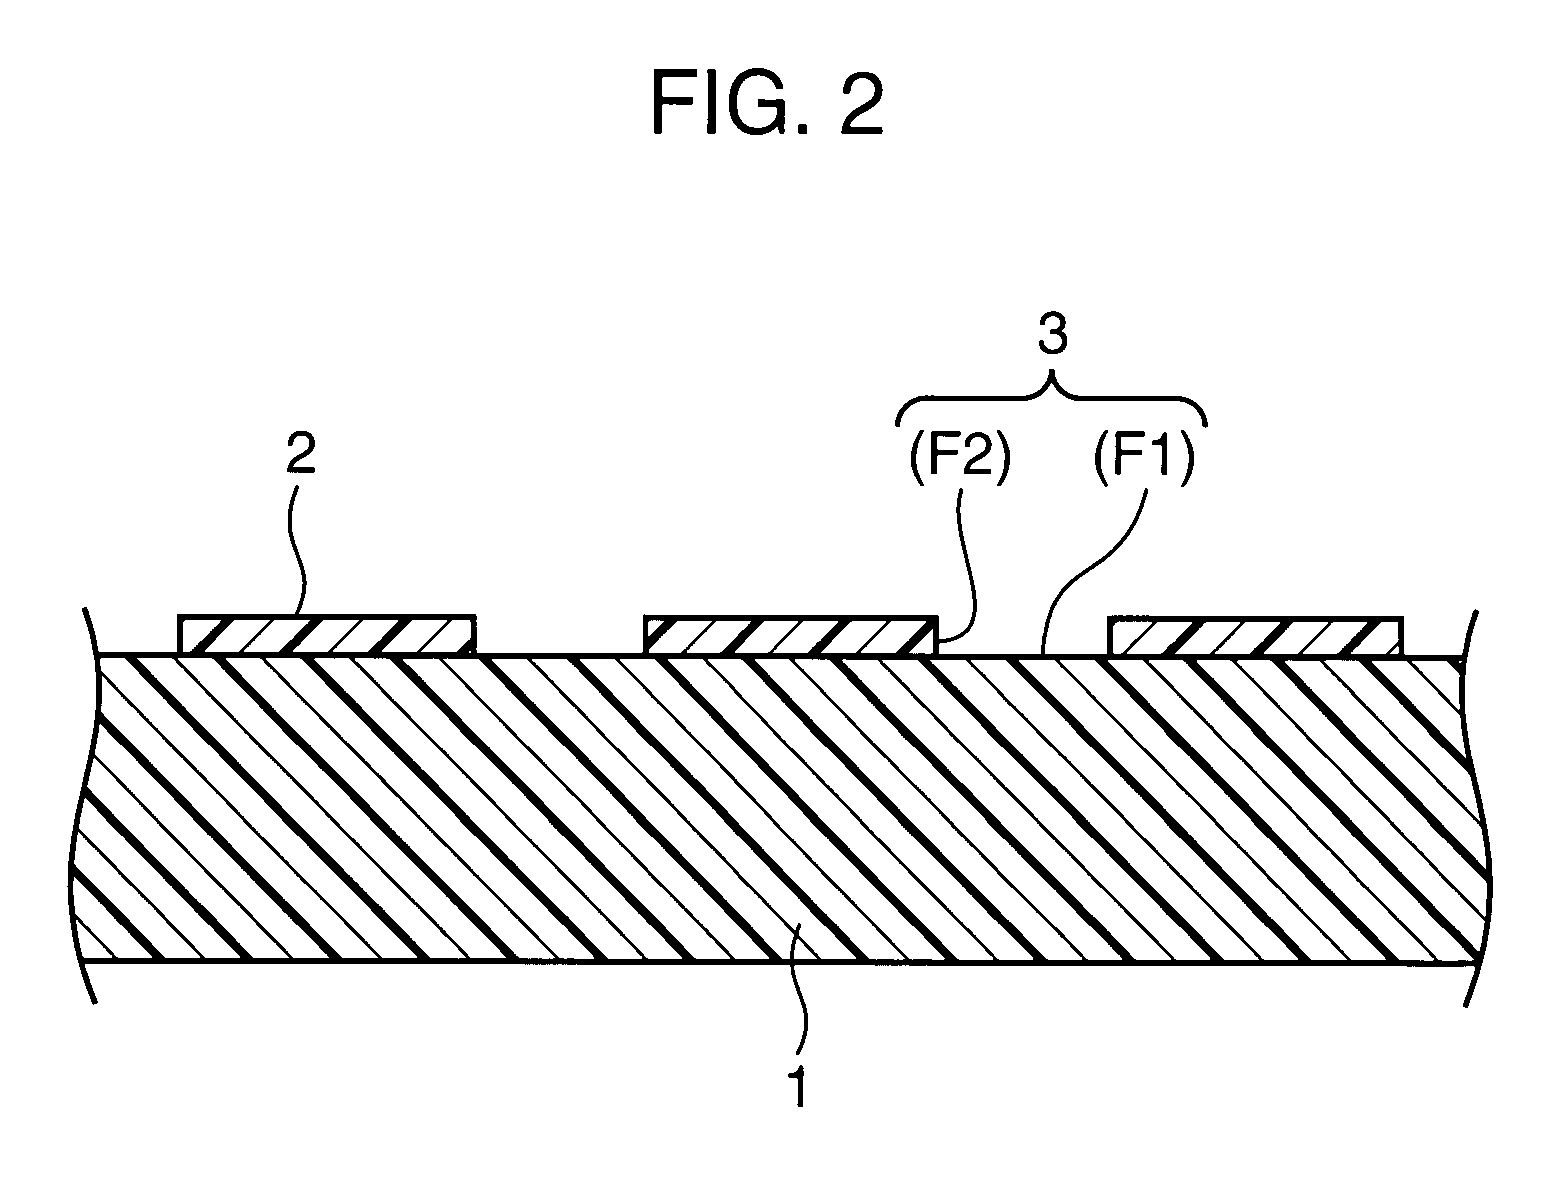 Micro Lens, Micro Lens Array, and Method of Manufacturing the Same